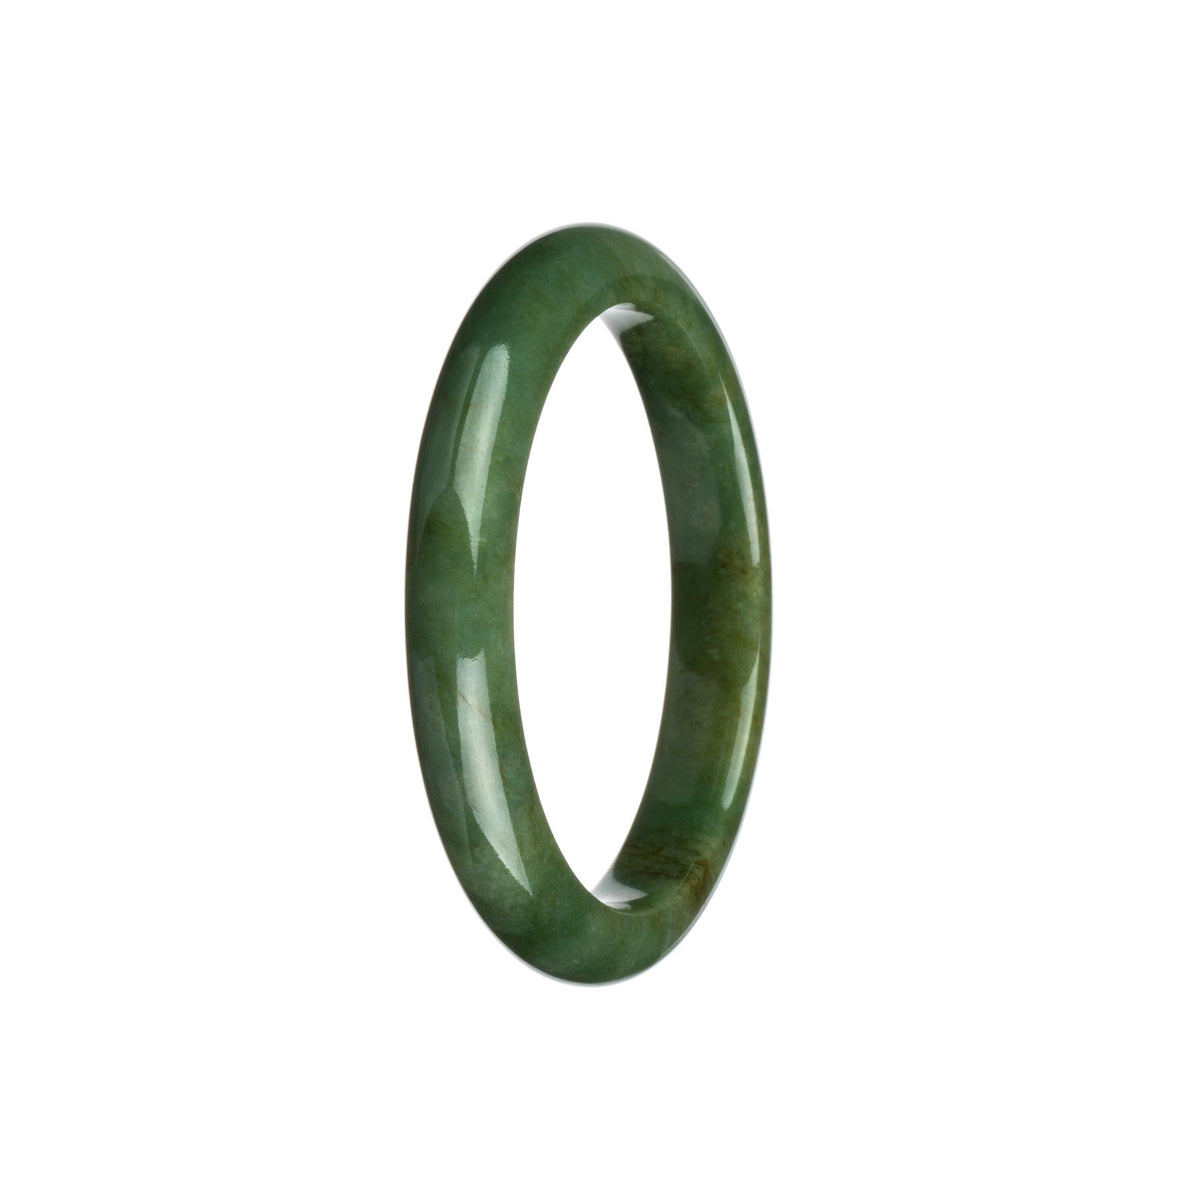 A close-up photo of a beautiful, semi-round, green jade bracelet with a glossy finish. The bracelet is made with genuine Type A green jade and measures 56mm in size. It features a smooth and elegant design.